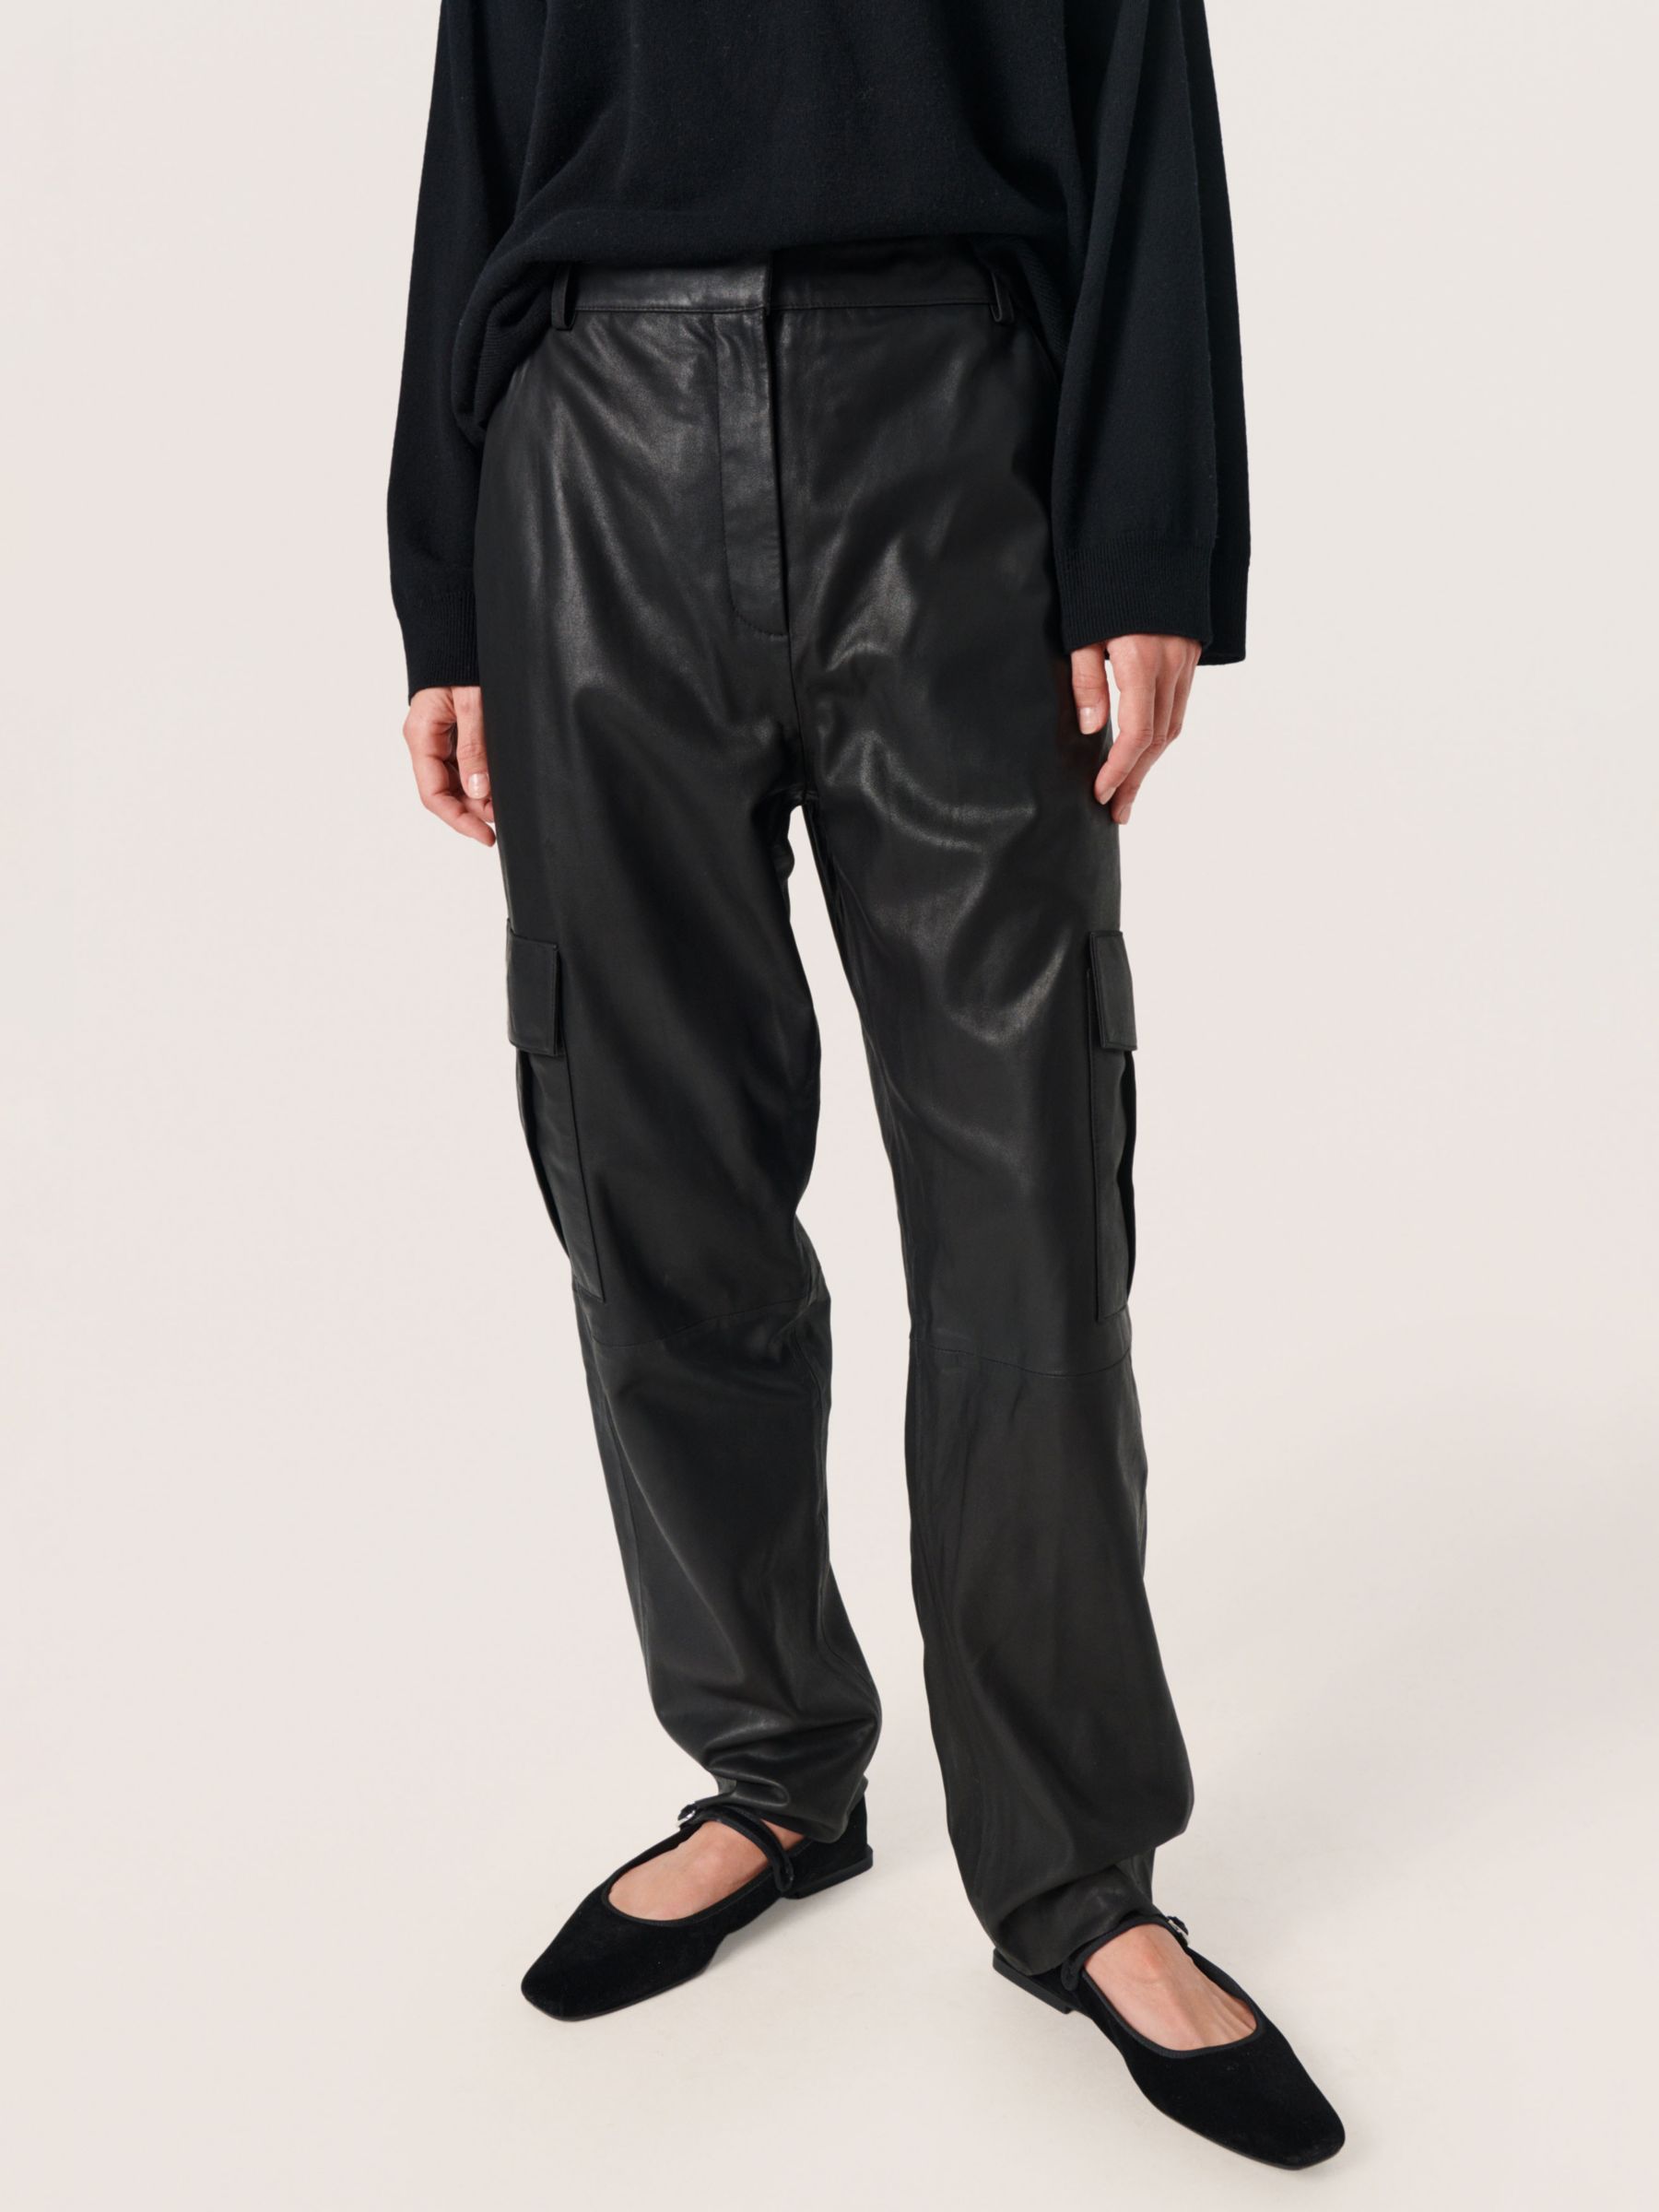 Soaked In Luxury Joselyn Cargo Leather Trousers, Black, XL